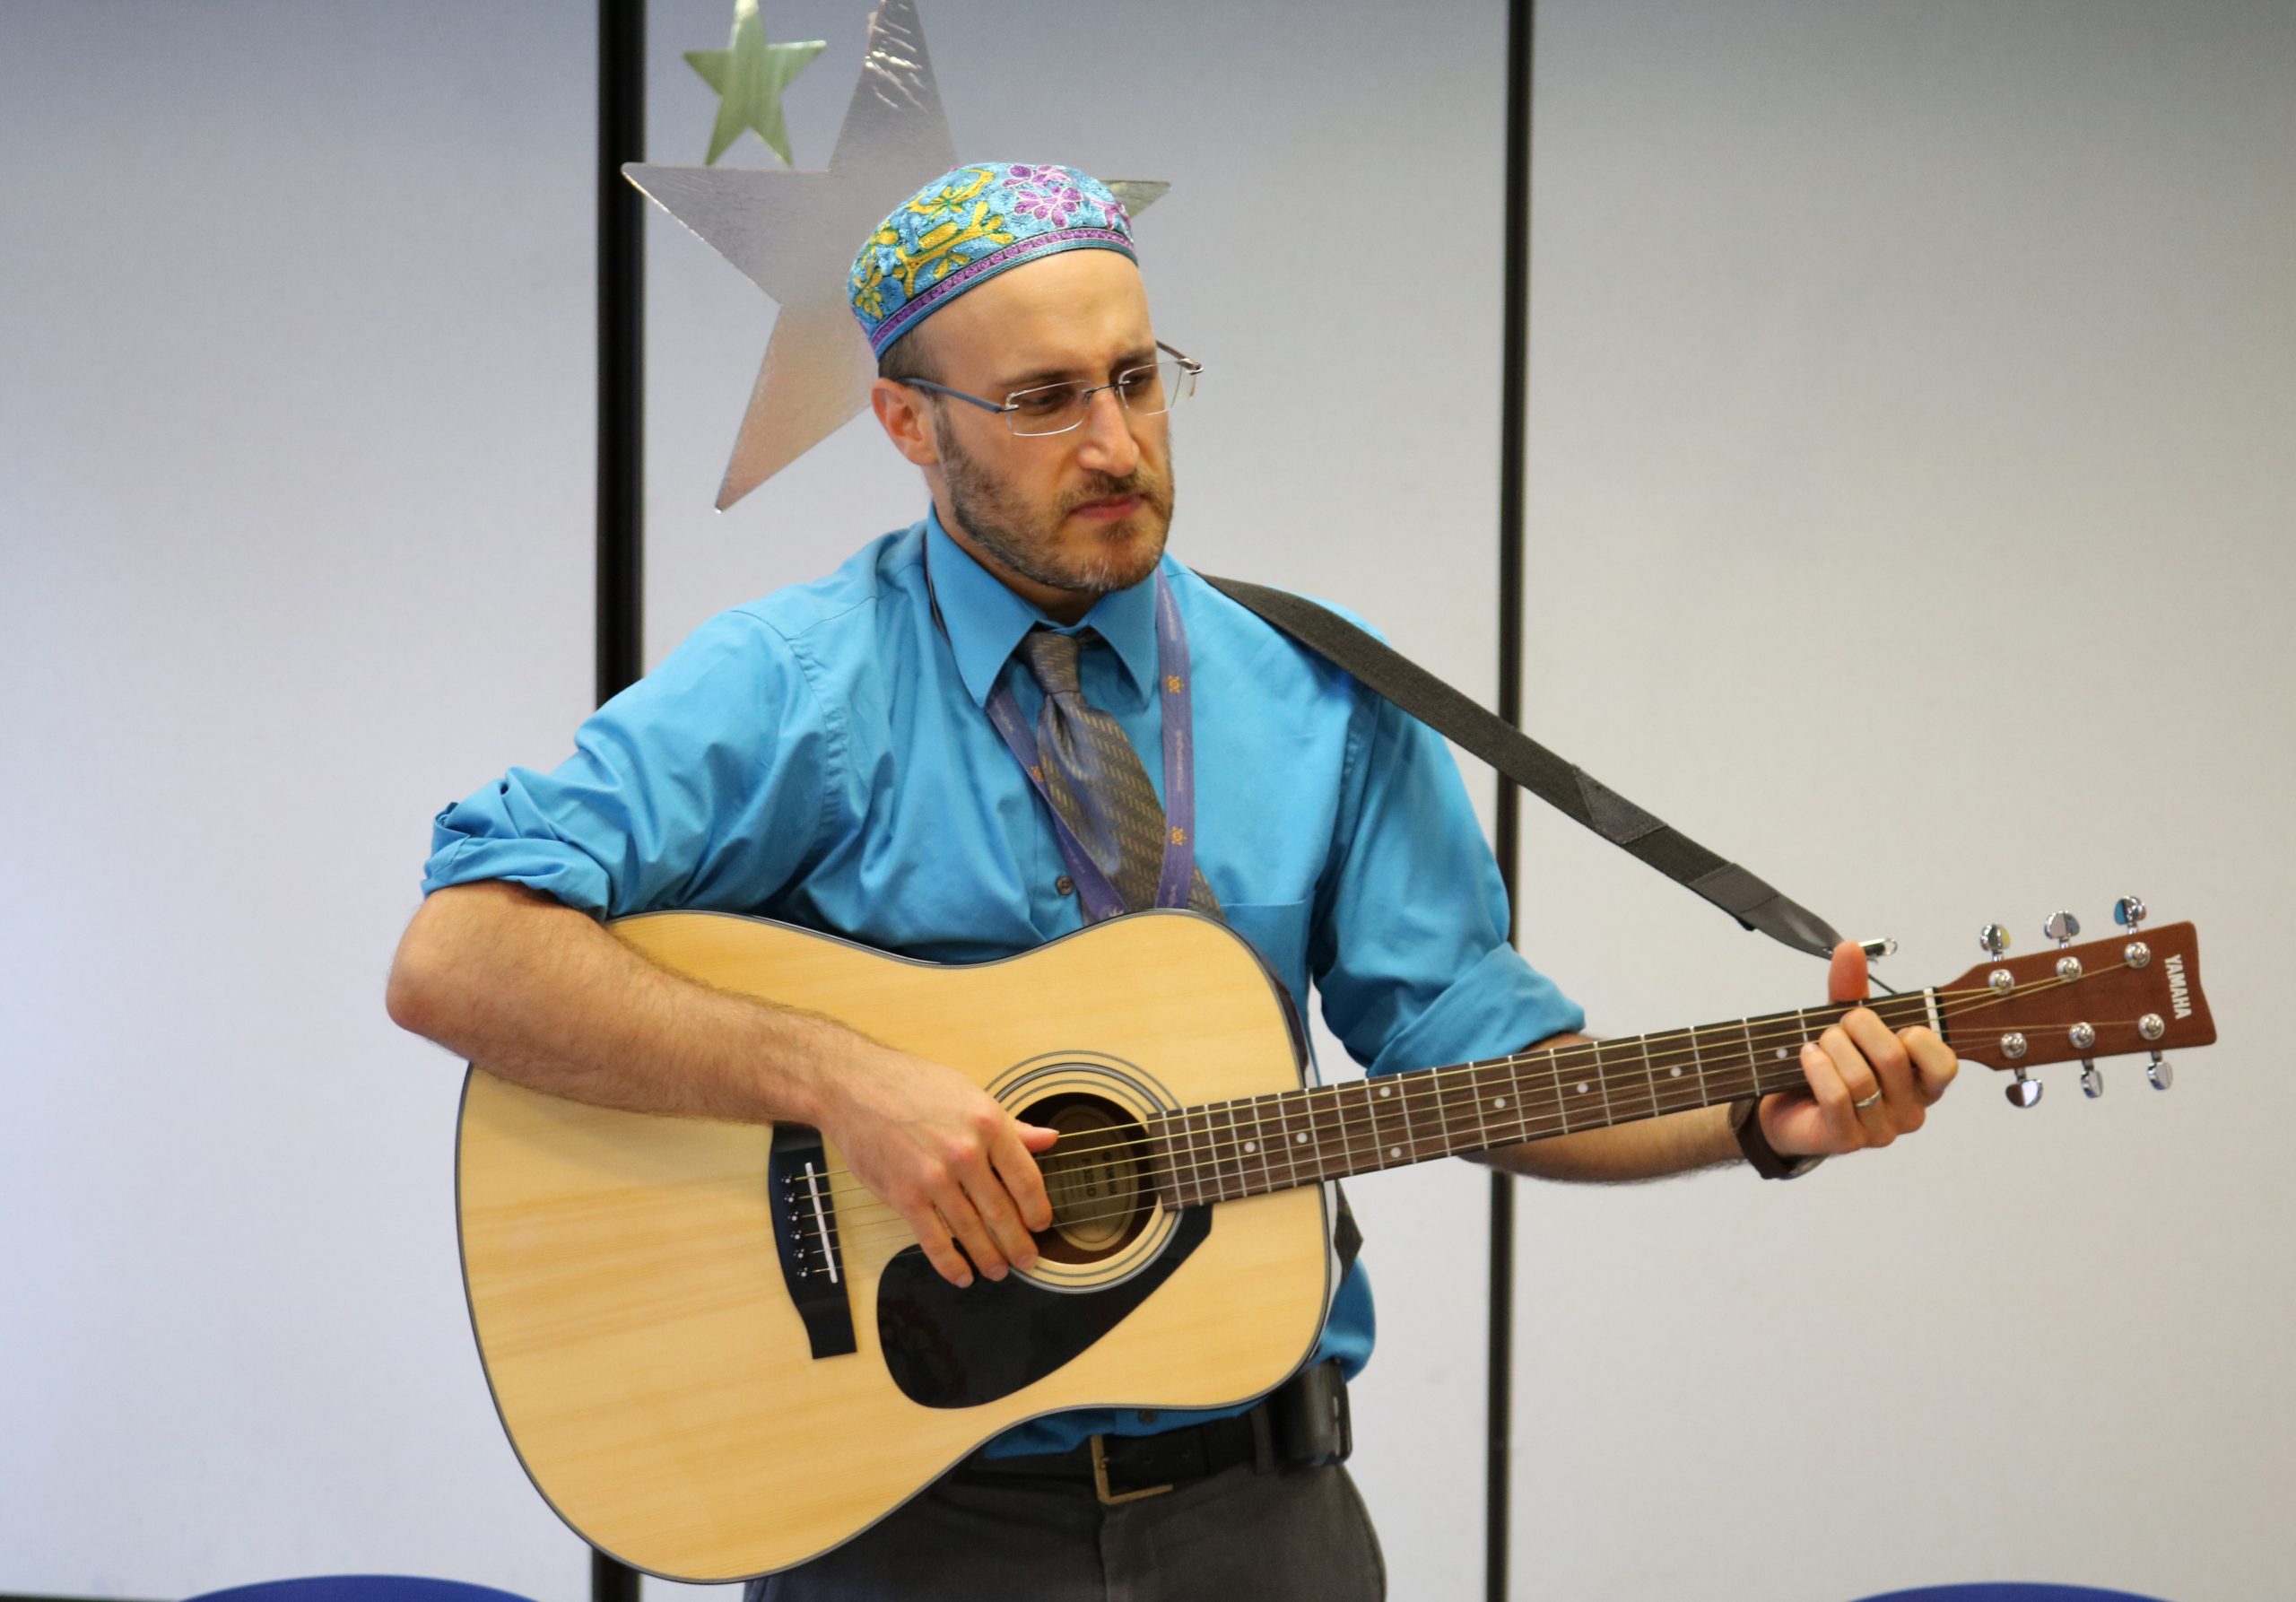 Chaplain Mike is playing his acoustic guitar